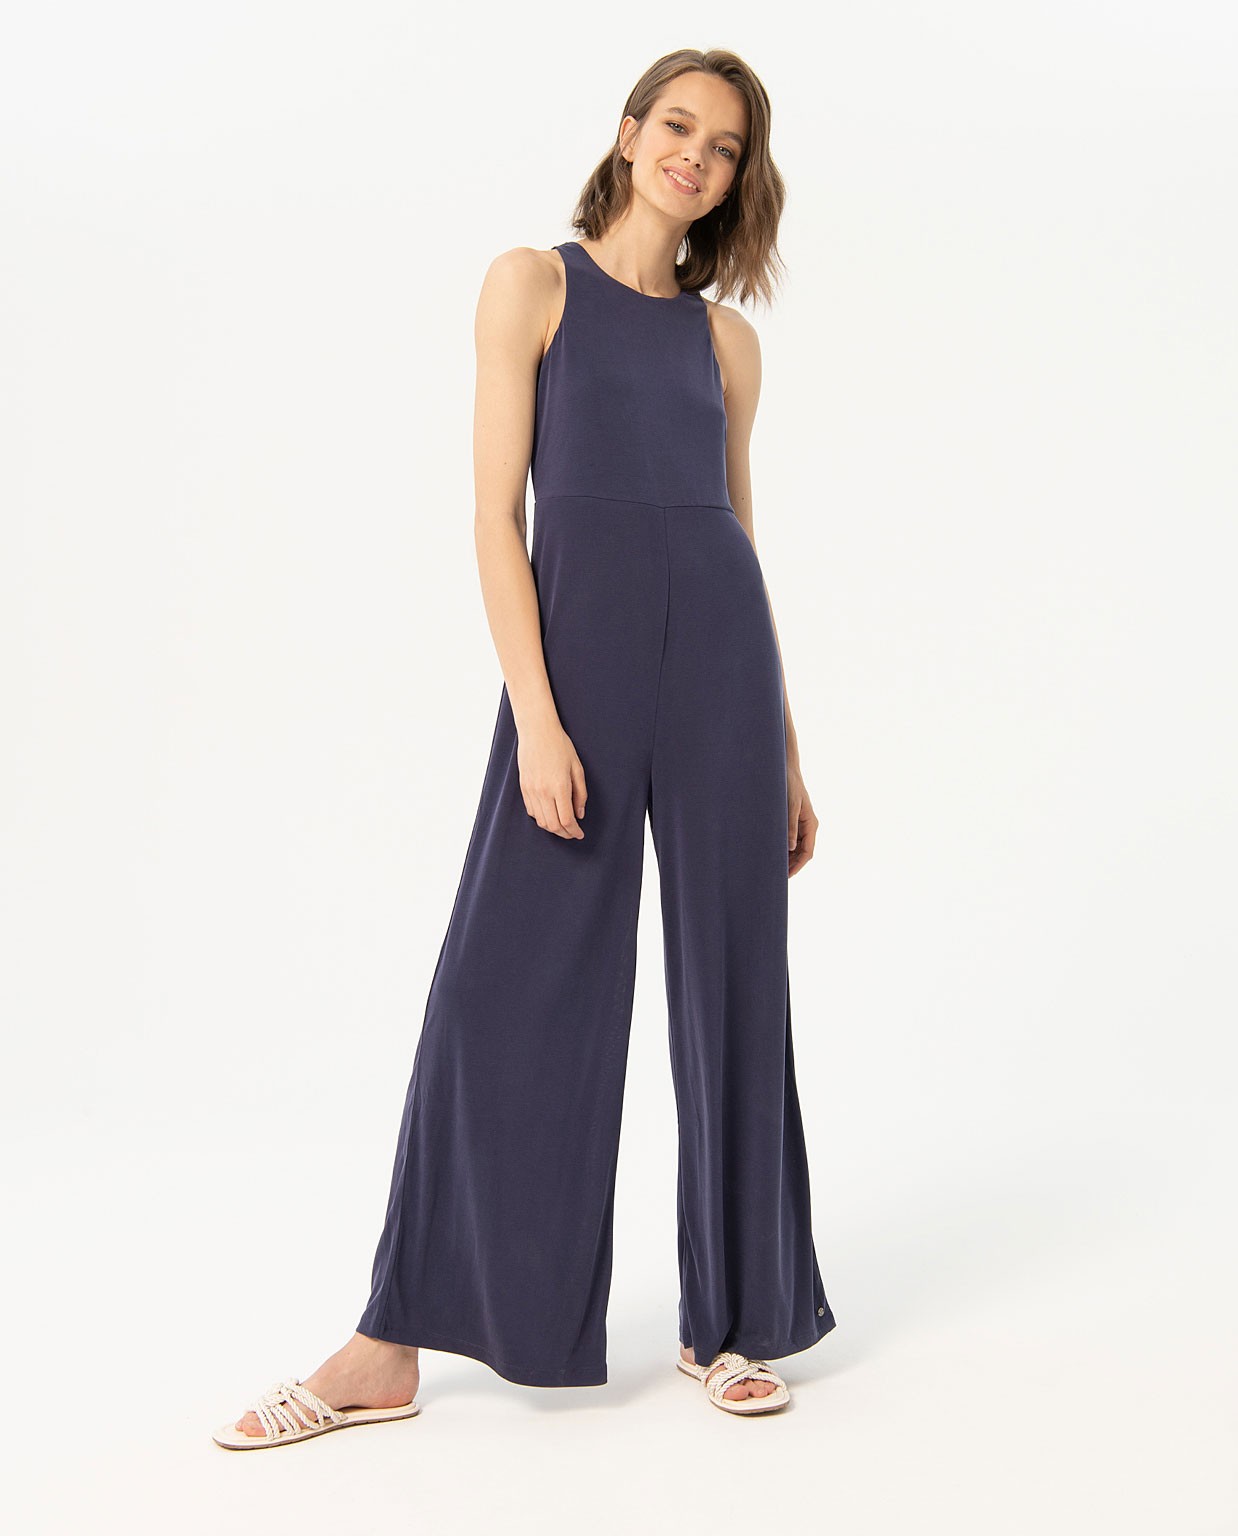 All Round Workout Dress - Agate Blue, Women's Dresses and Jumpsuits